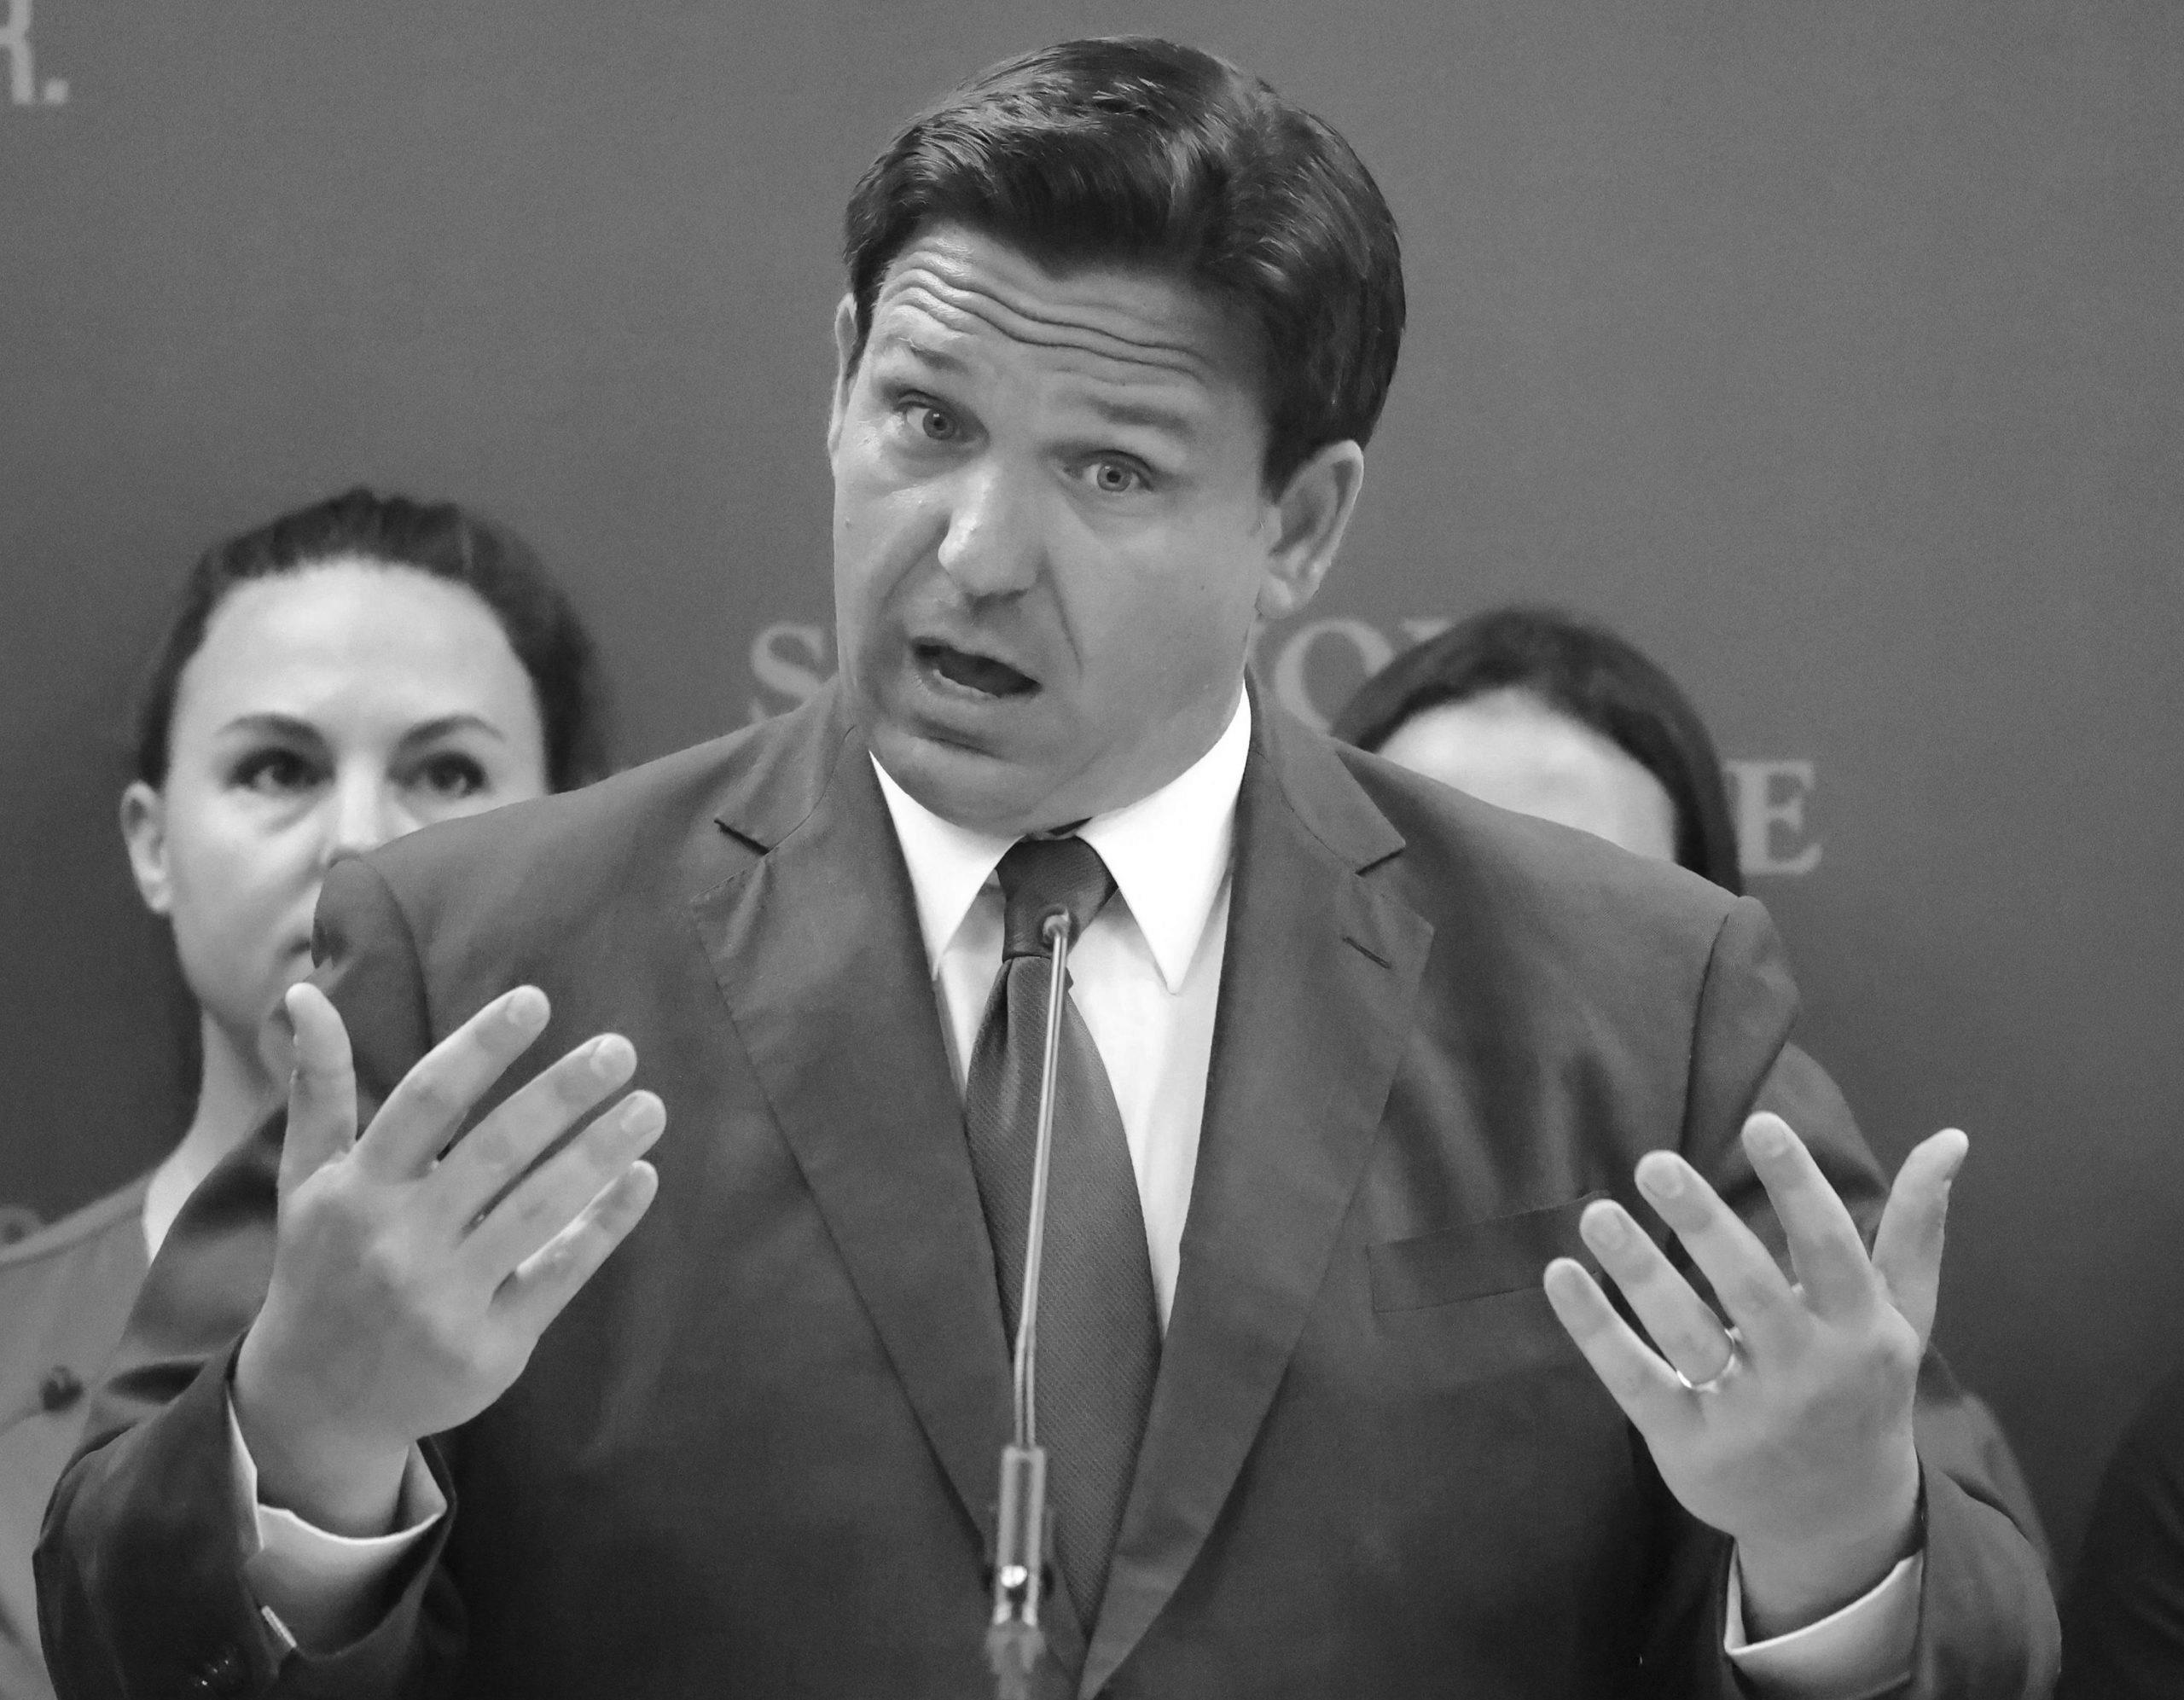 Ban on protests in entrance of properties signed by Gov. DeSantis